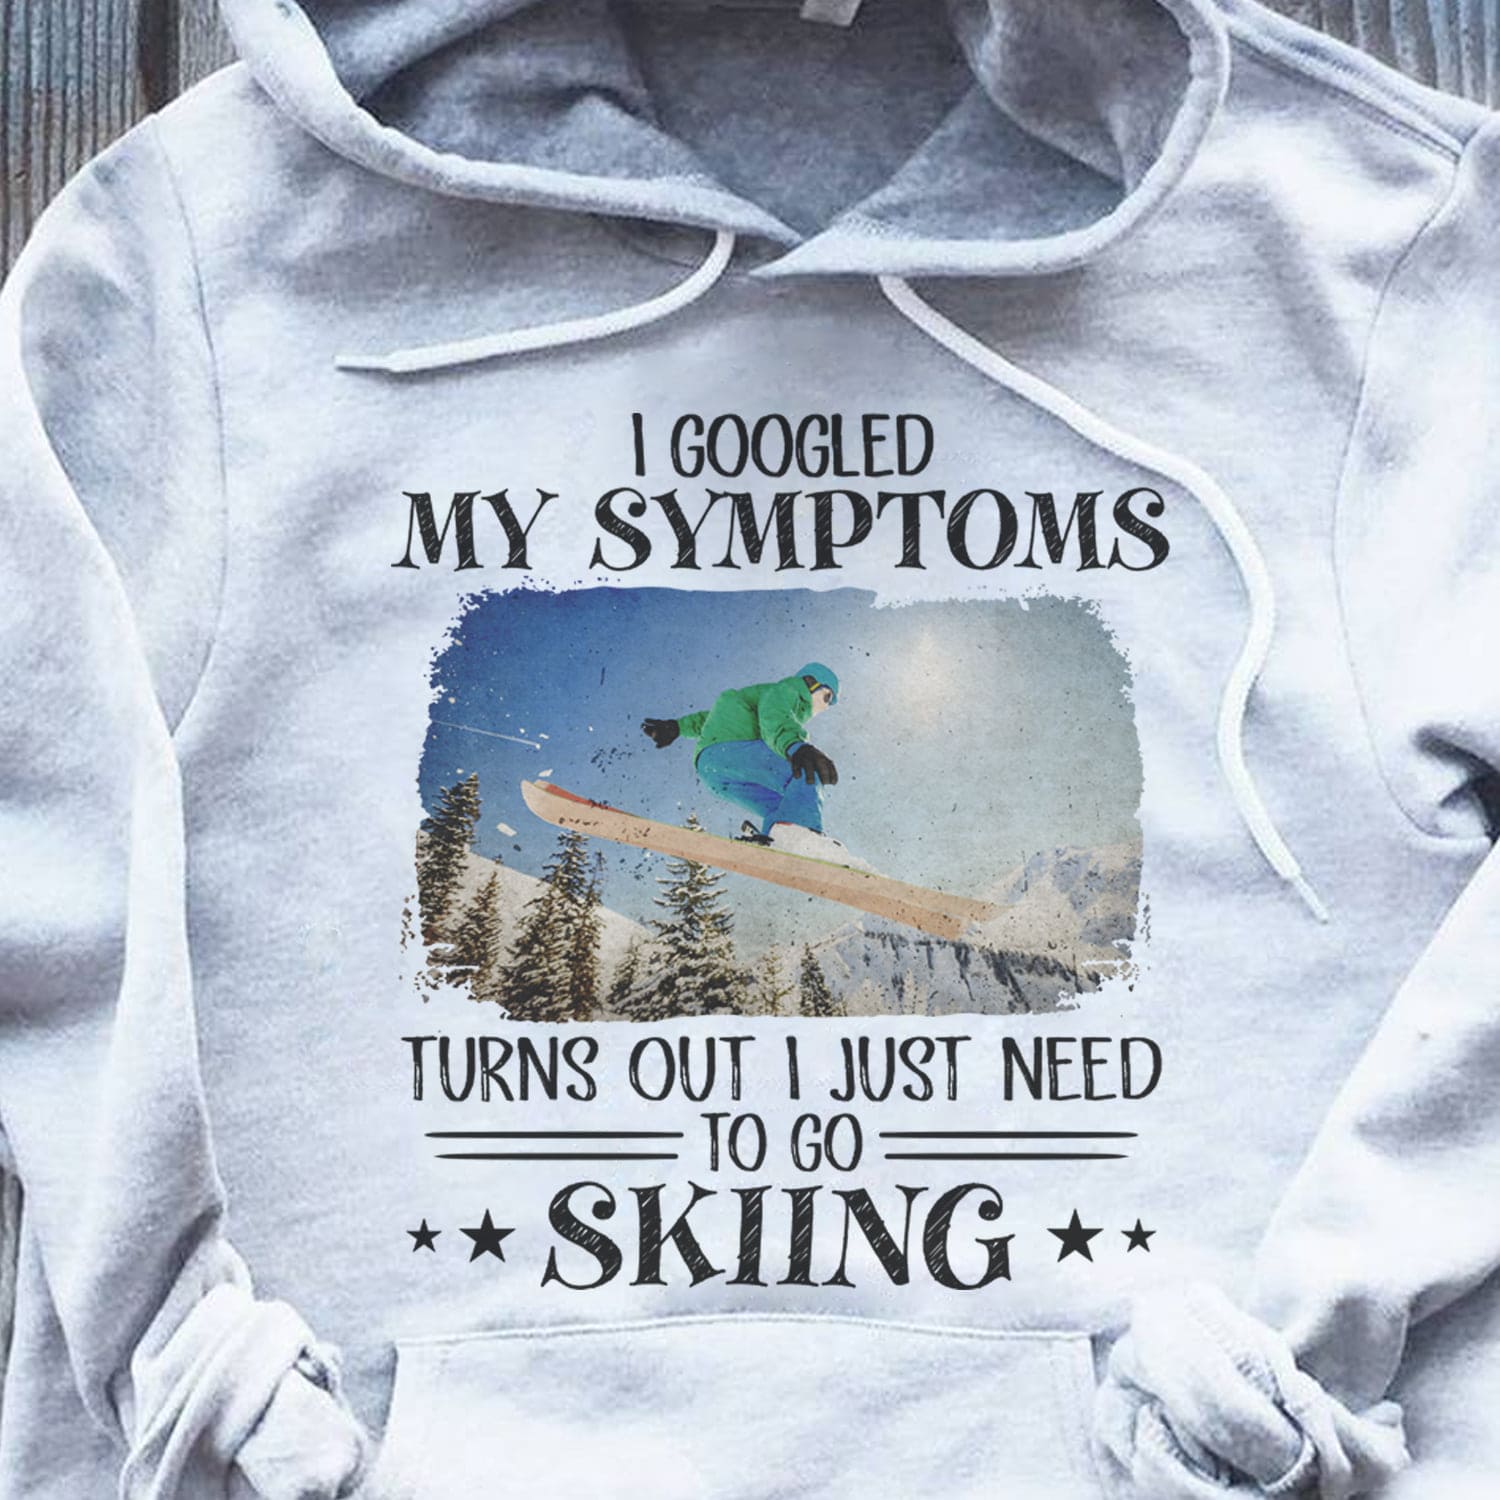 Skiing Man - I googled my symptoms turns out i just need to go skiing